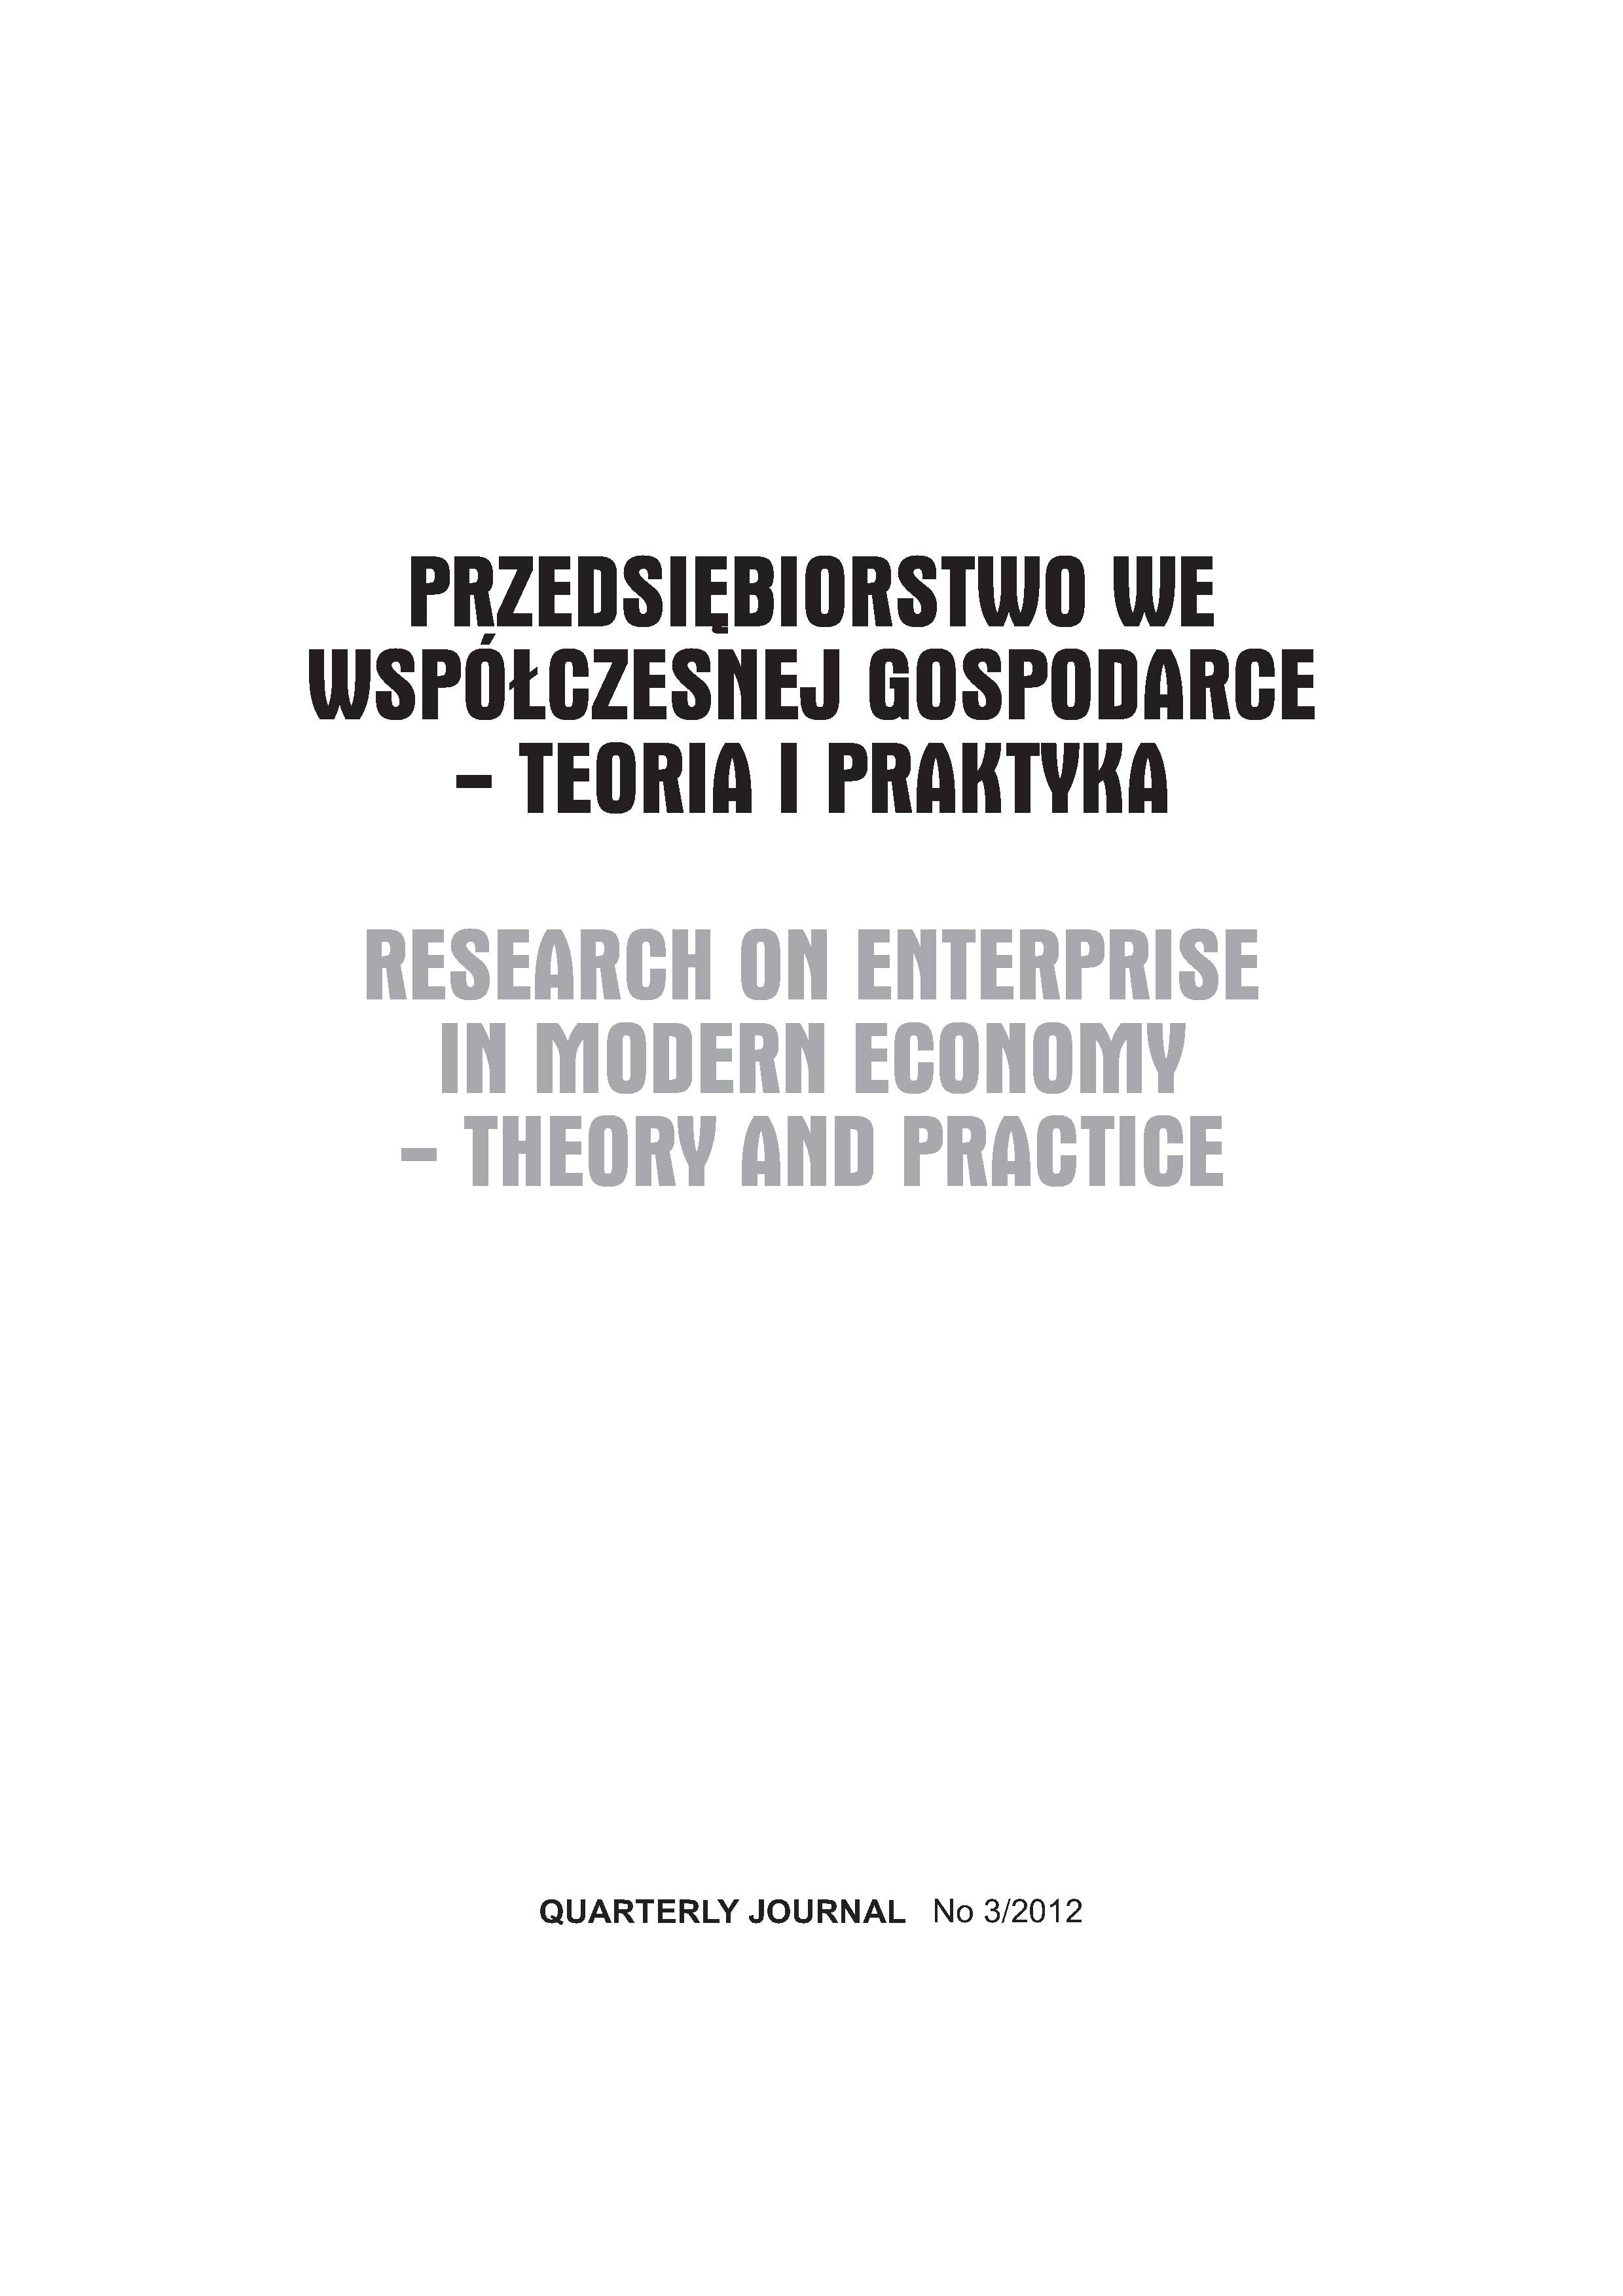 Best Agers in the Baltic Sea Region – a qualitative study of employers’ attitudes Cover Image